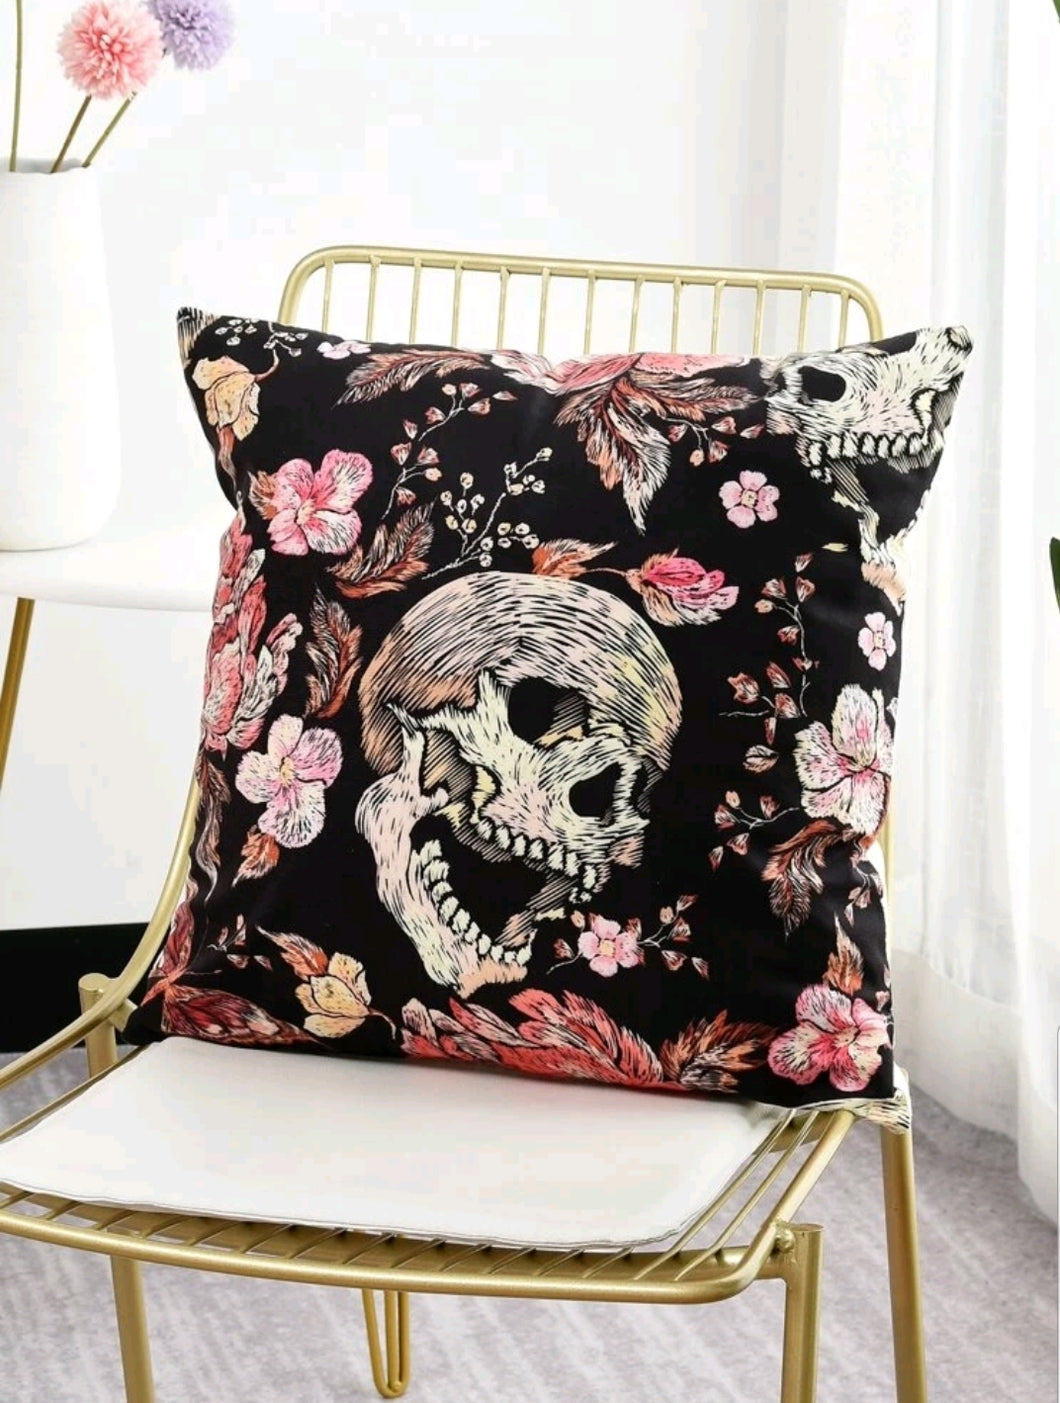 Glamorous Fashion Trendy Skull & Flowers Print Cushion Cover - gothic Romantic Noir home decor item and gift idea for Halloween and the day of the dead night. The item comes in a gift bag. Material: Polyester Composition: 100% Polyester Colour: Multicolour Pattern Type: Floral Type: Pillowcase Size: Length 45cm/17.7 inch X Width 45cm/17.7 inch